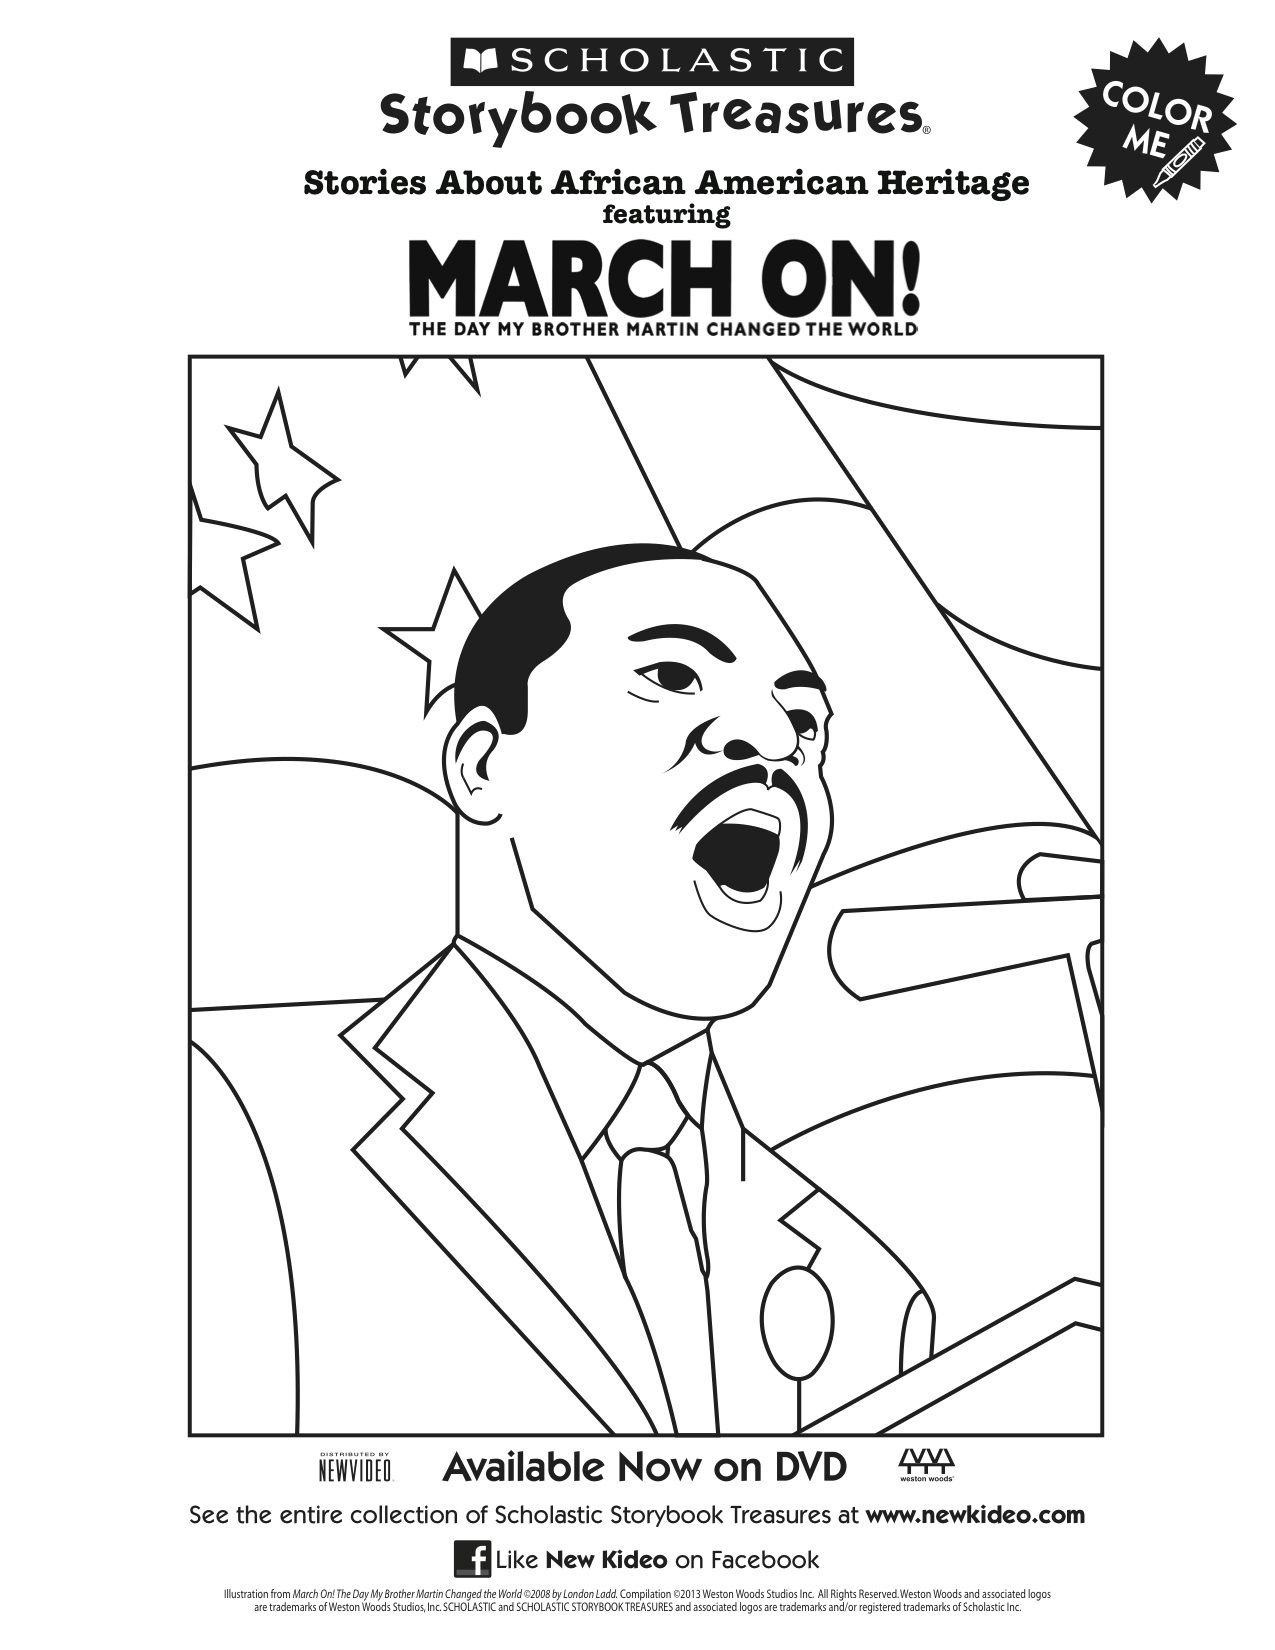 Martin Luther King Jr. March On Coloring Page | Printable Coloring - Martin Luther King Free Printable Coloring Pages